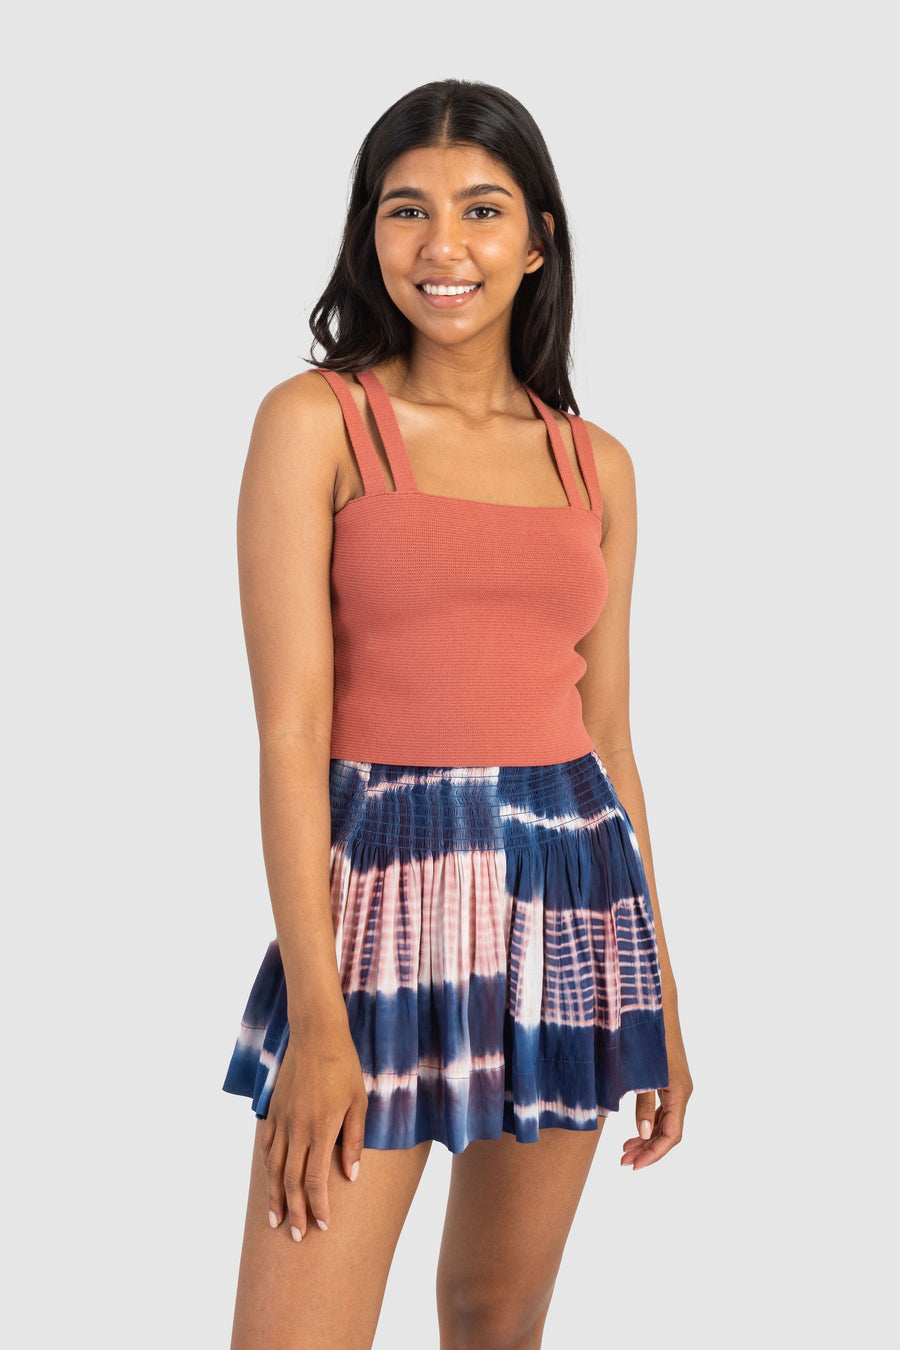 Erica Skirt Navy Tie Dye *Limited*Edition*